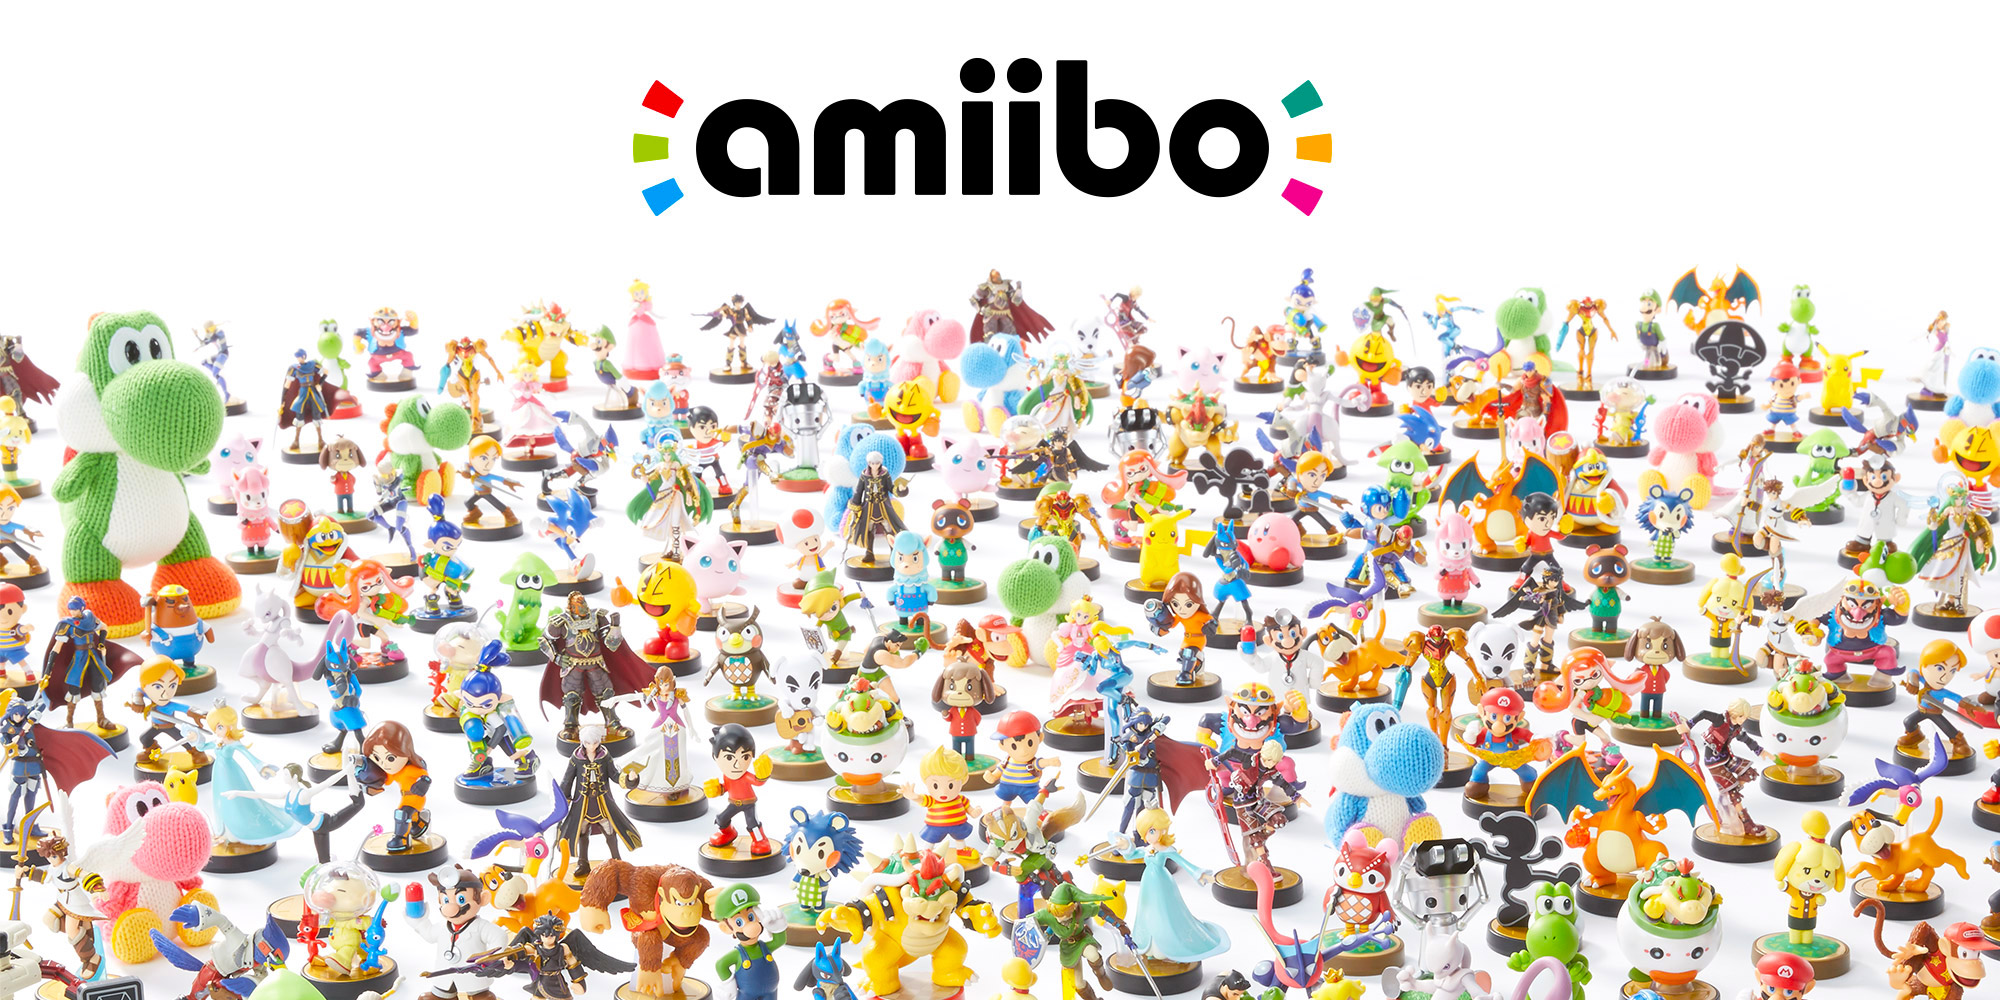 Complete your collection w/ these amiibo deals from 3 Samus, Sonic